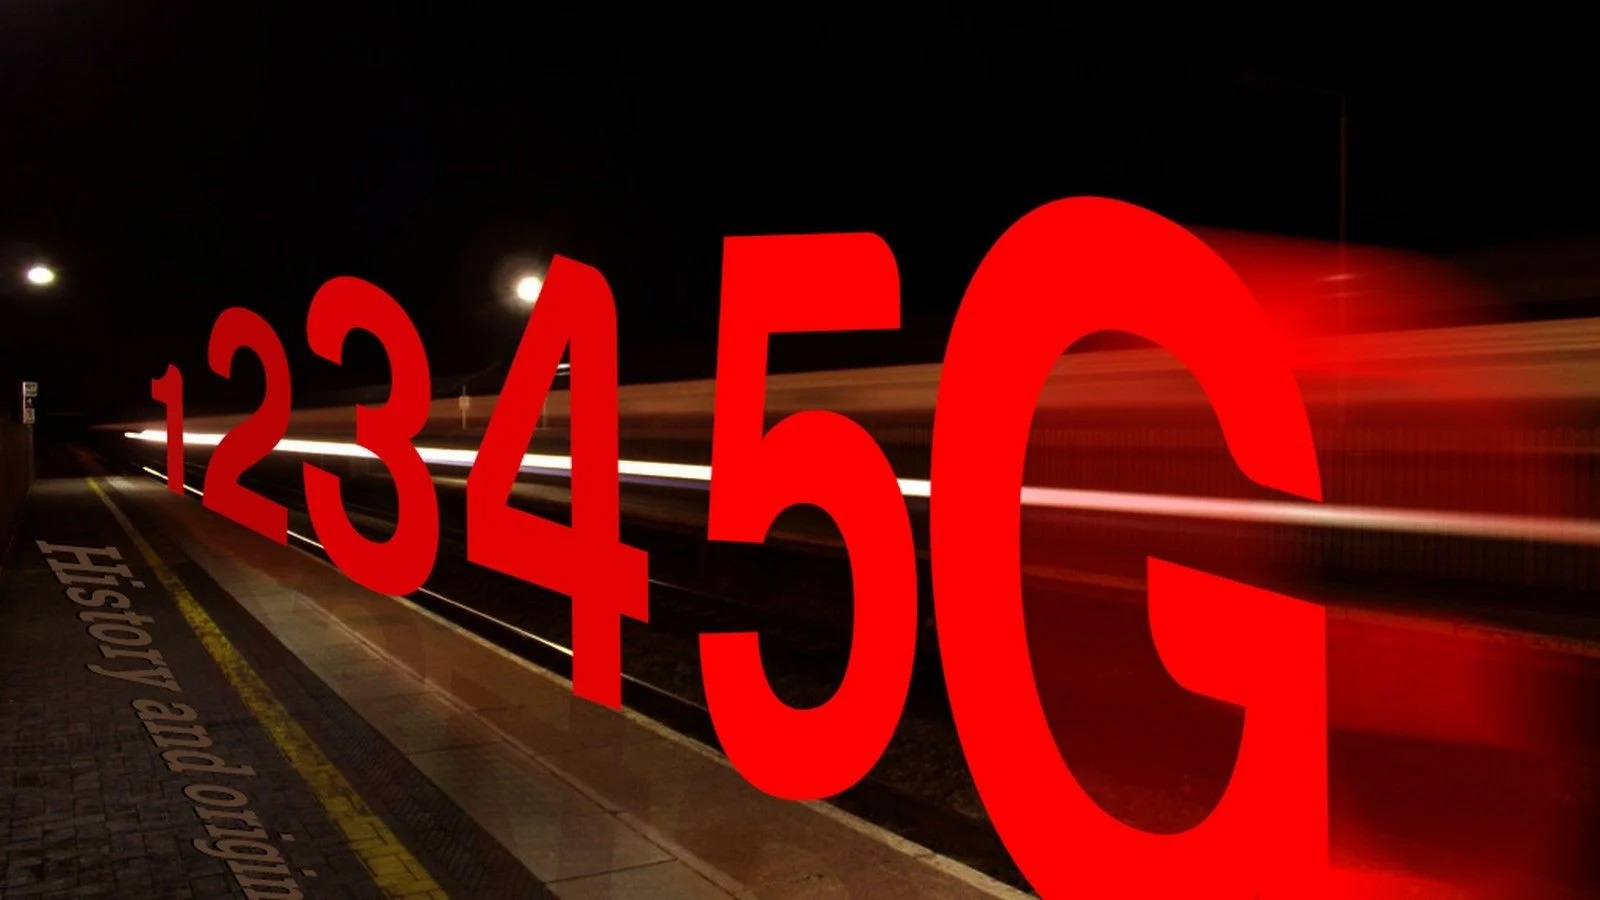 Bharti Airtel launched their 5G Plus service in India